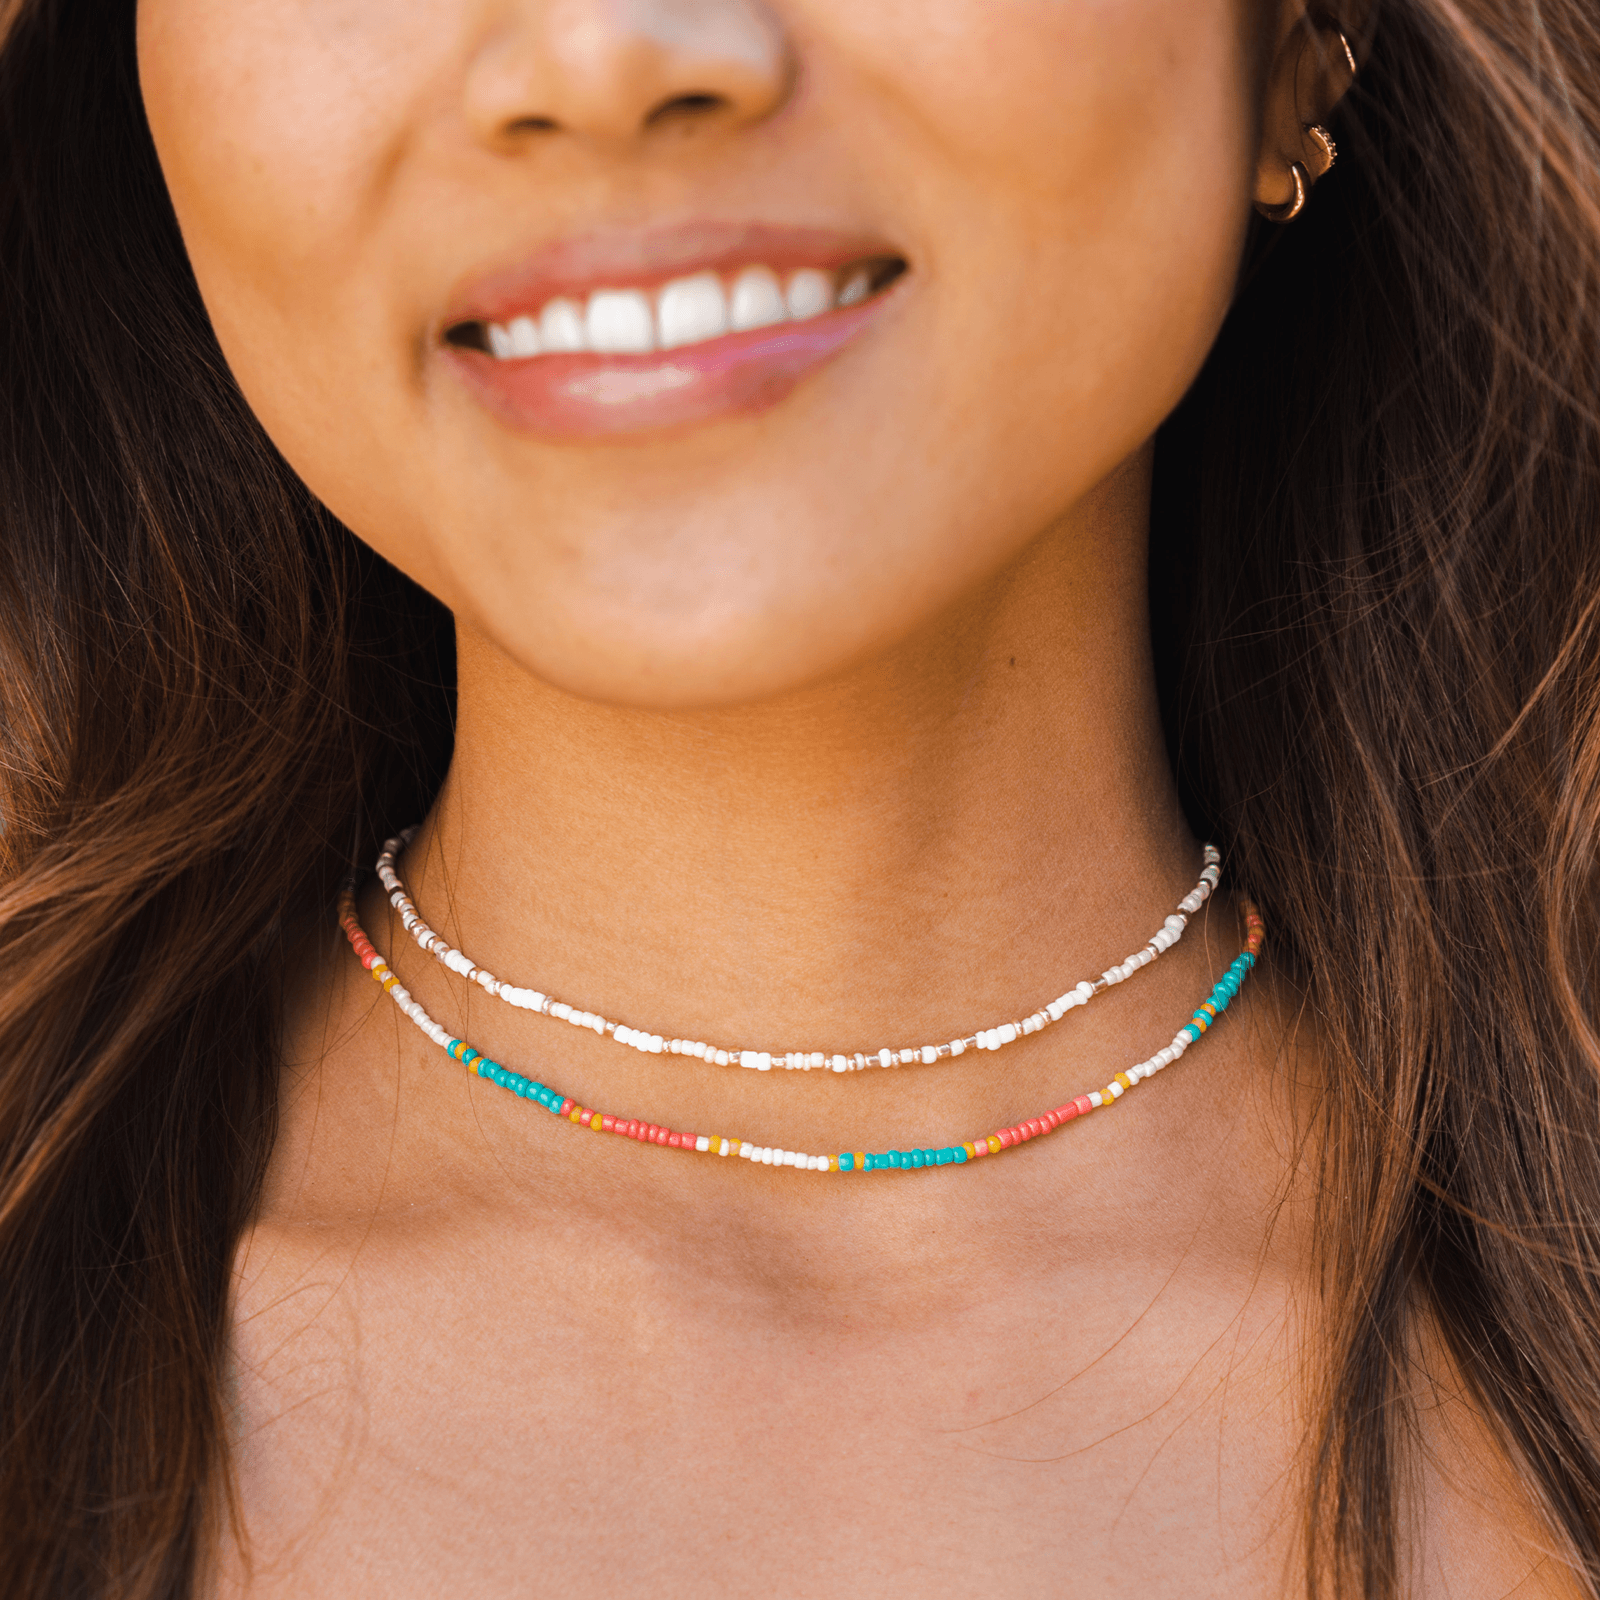 Summer Daze Necklace - The Salty Mare